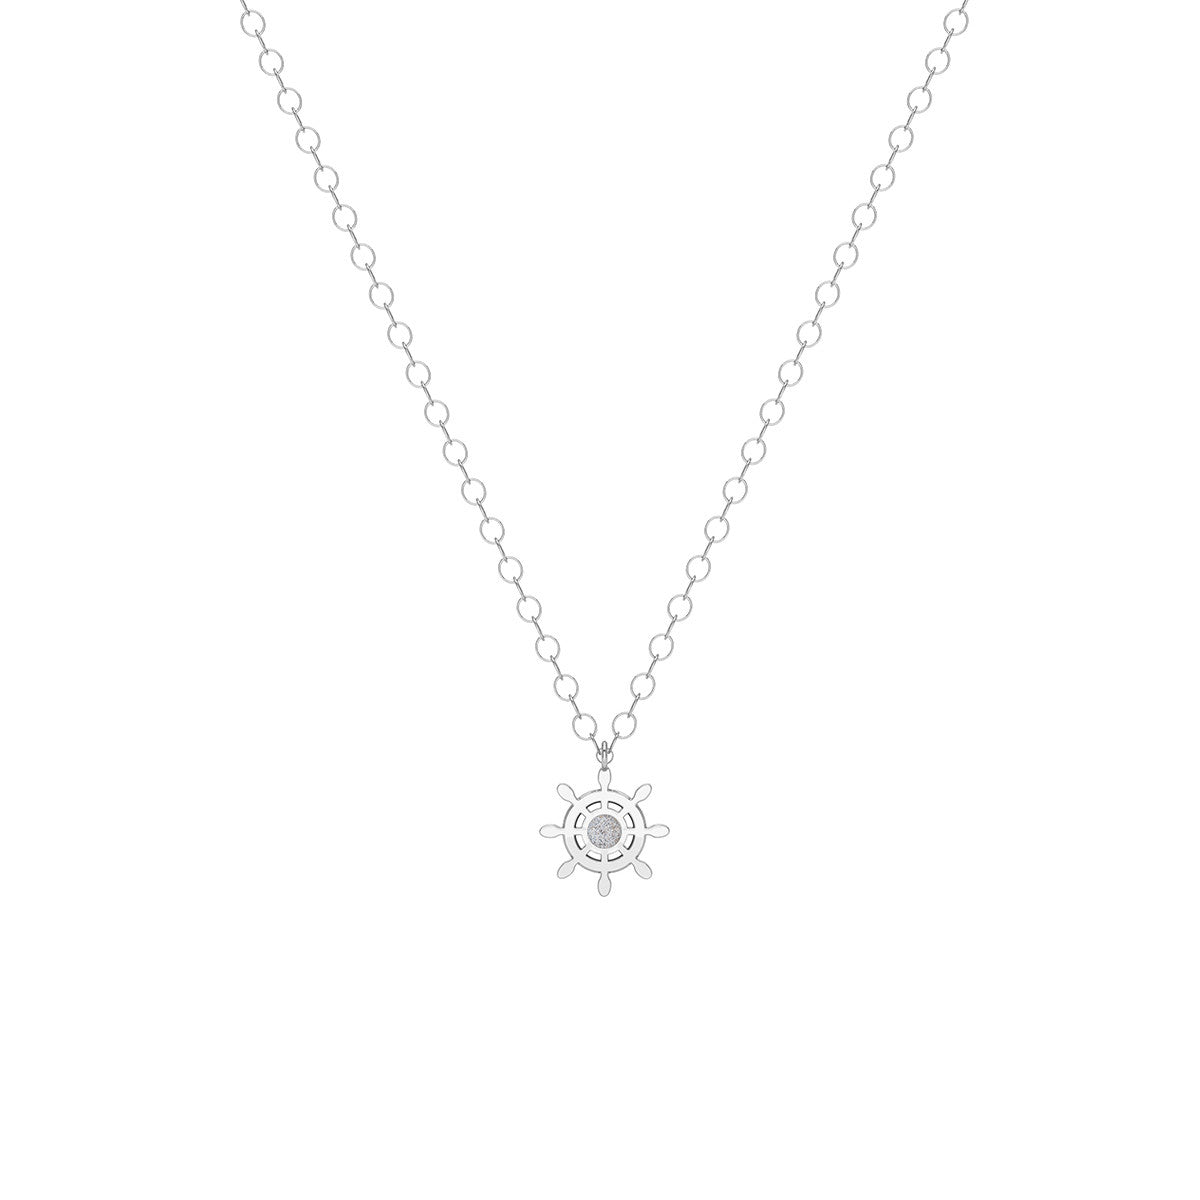 Dainty Helm Necklace - Silver